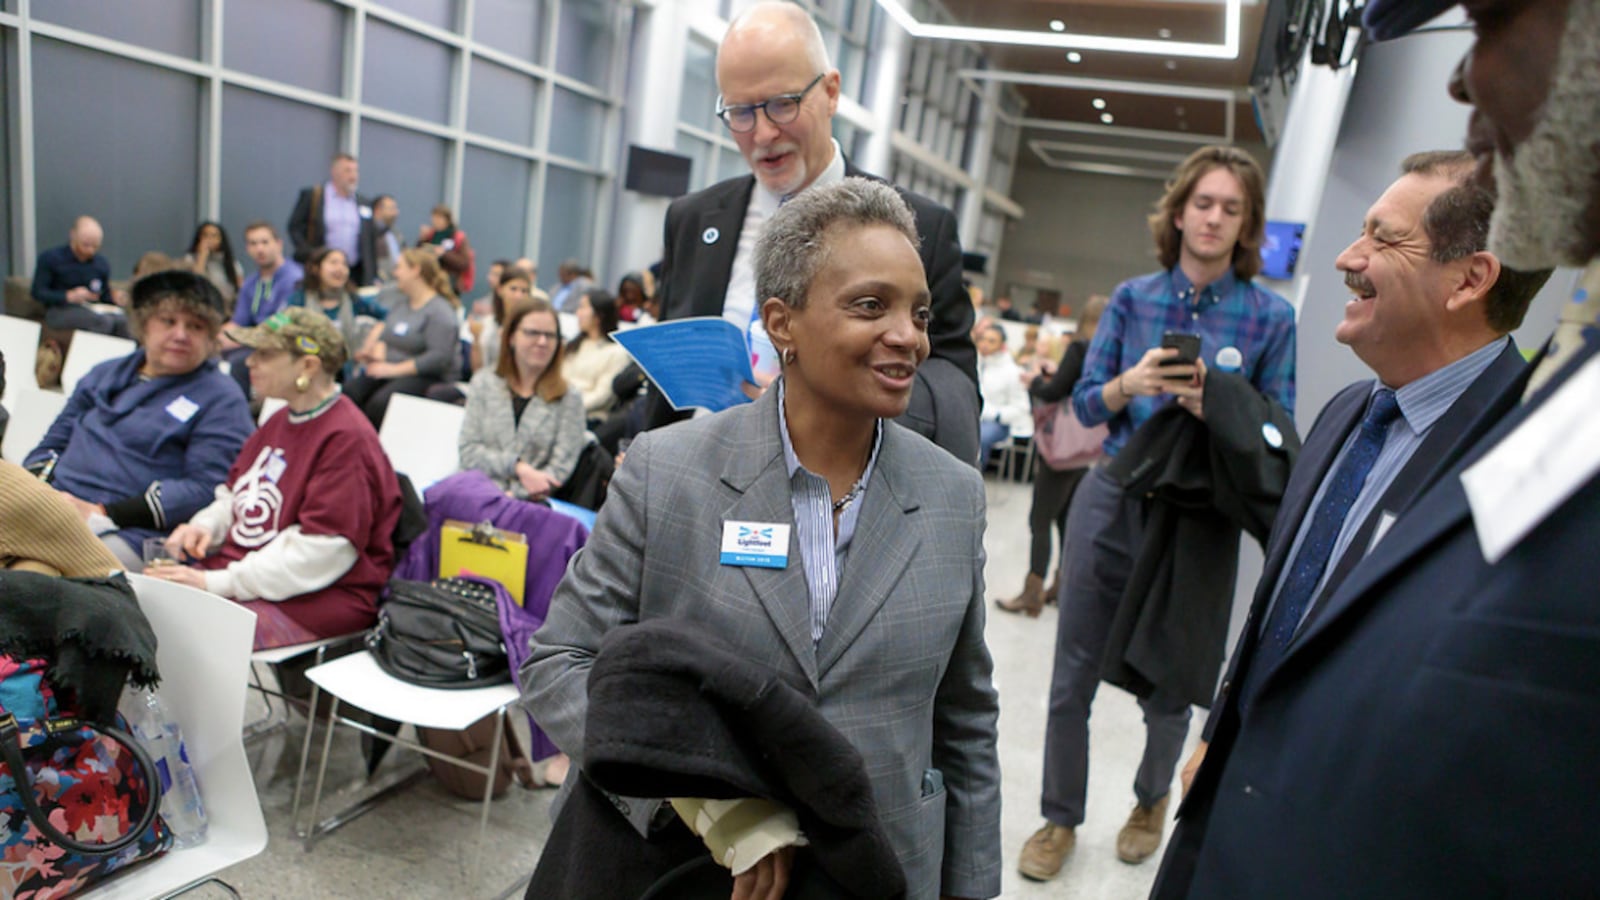 Lori Lightfoot appeared at a Chalkbeat Chicago event in December about the future of the city's public schools.